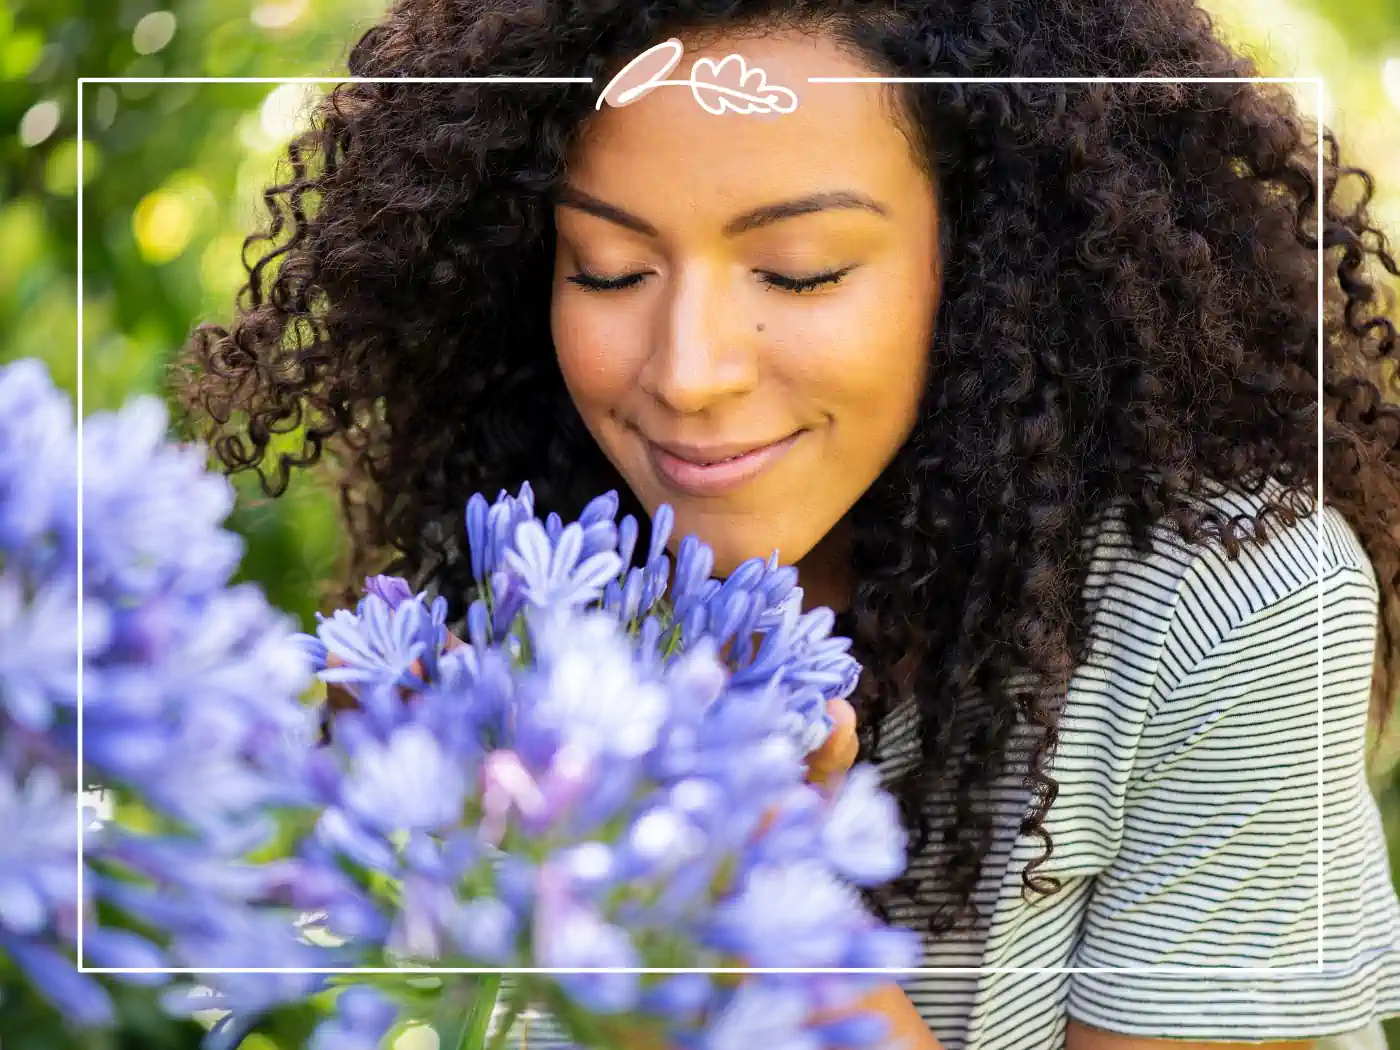 A woman smiling as she inhales the fragrance of beautiful purple flowers in a garden. Fabulous